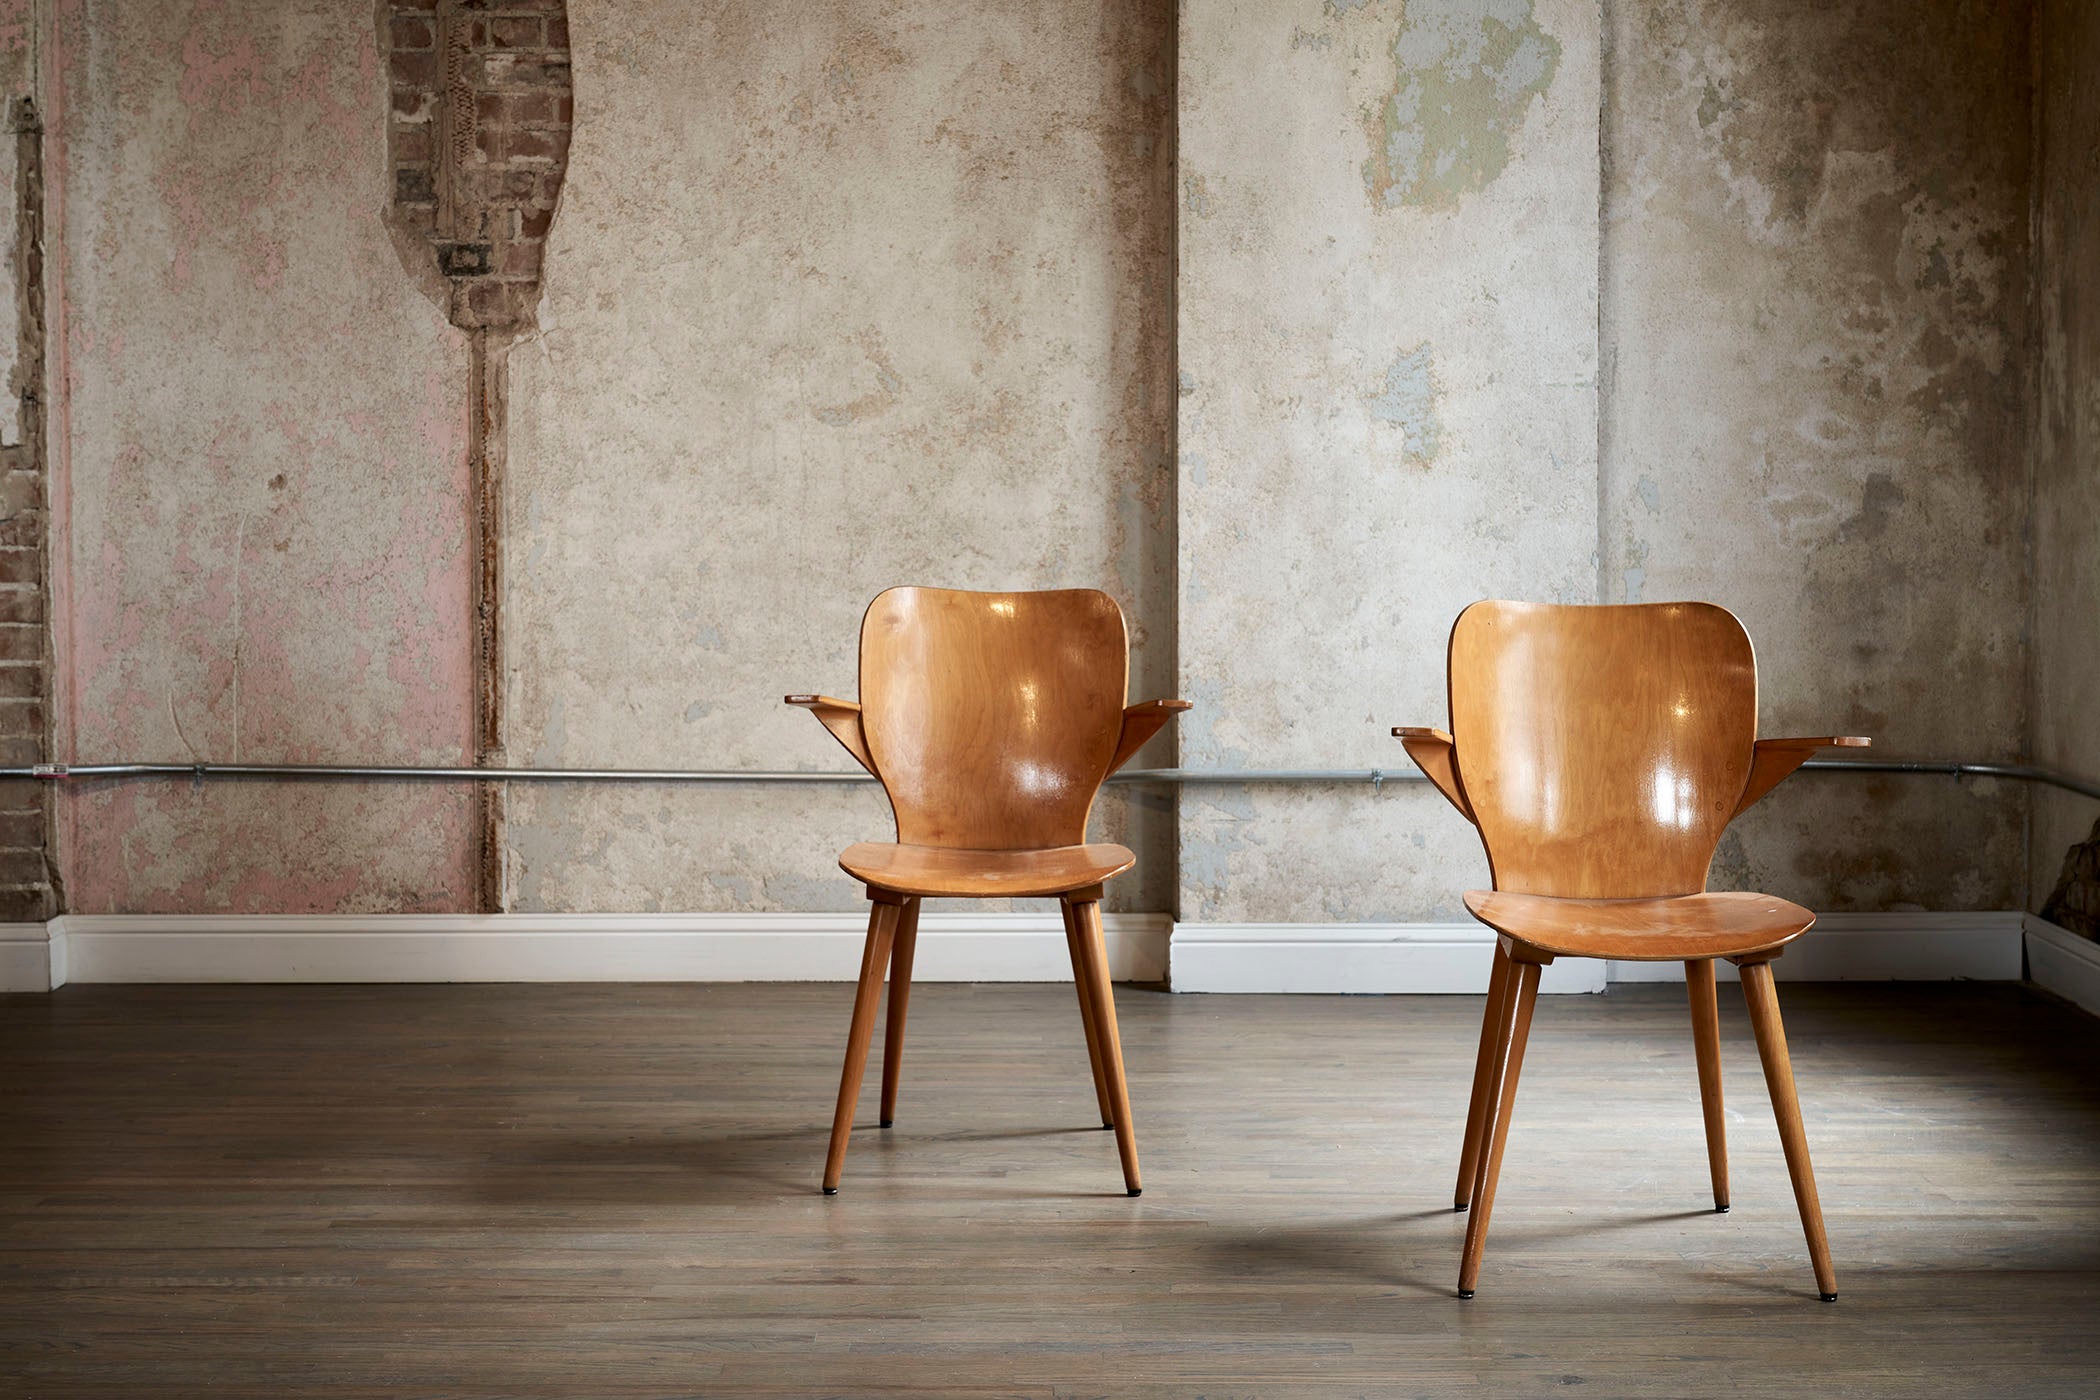 Pair of Midcentury Bent Plywood Chairs